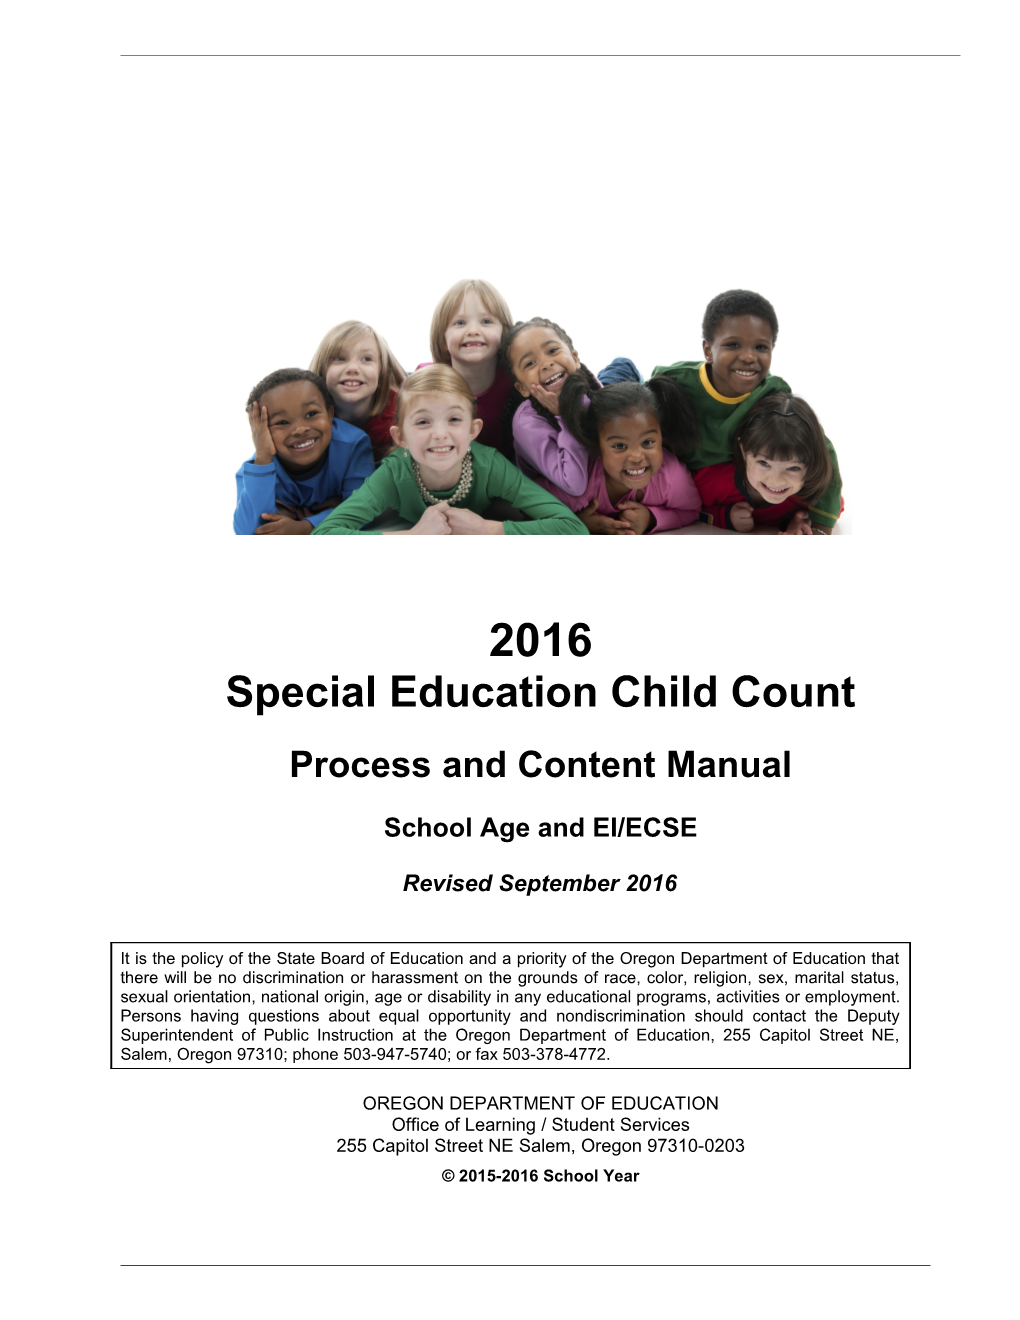 Special Education Child Count